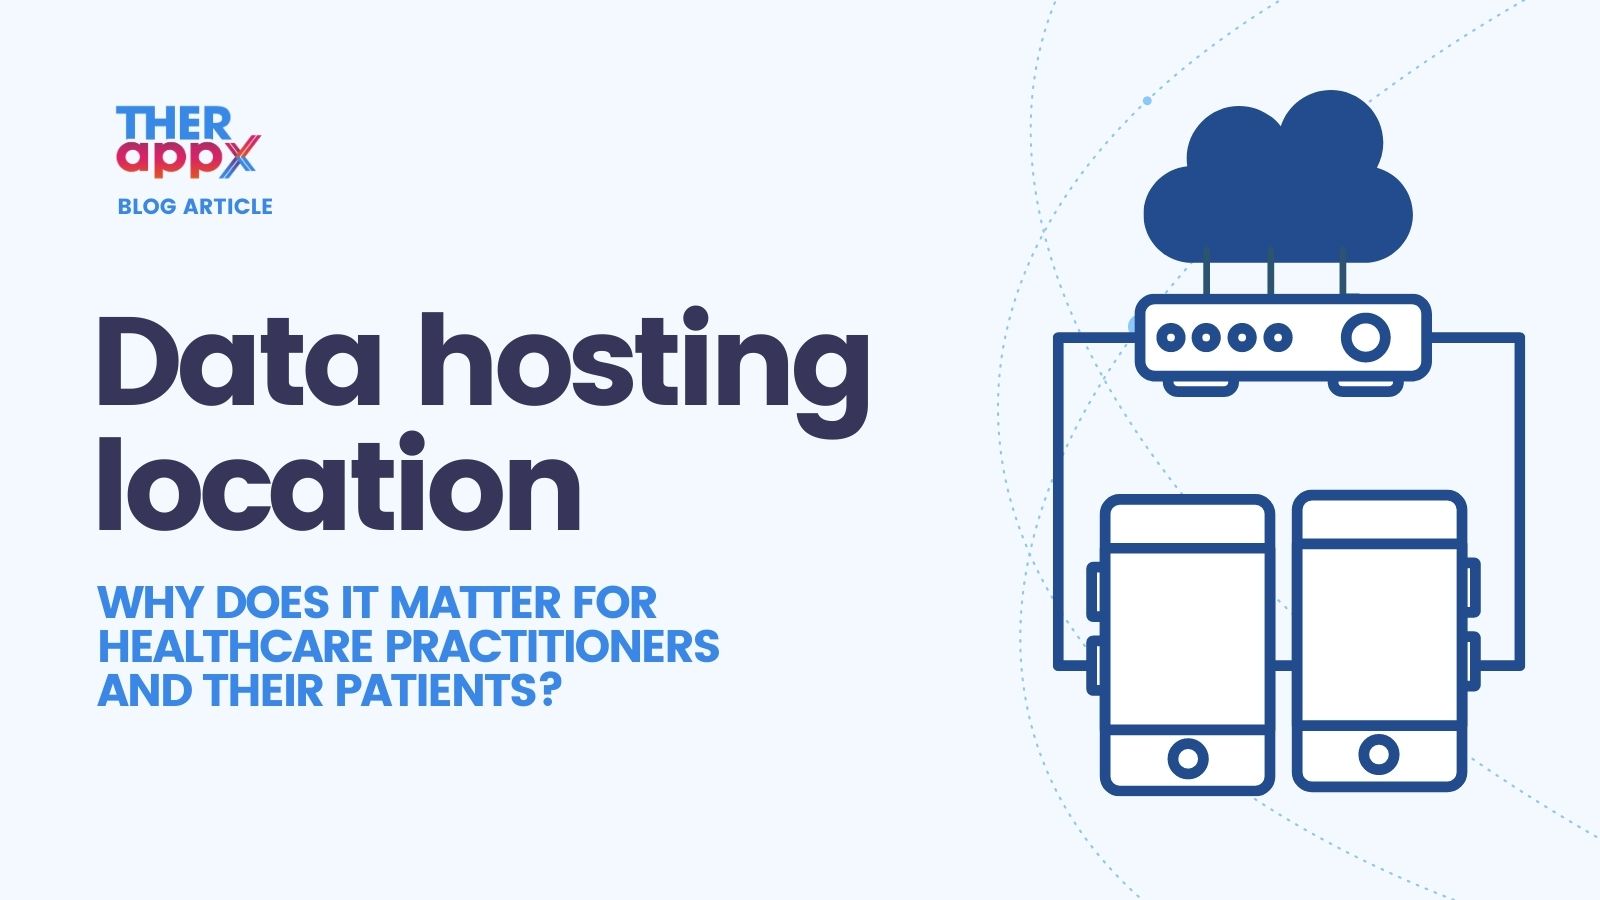 Everything you need to know on data hosting location as a healthcare practitioner